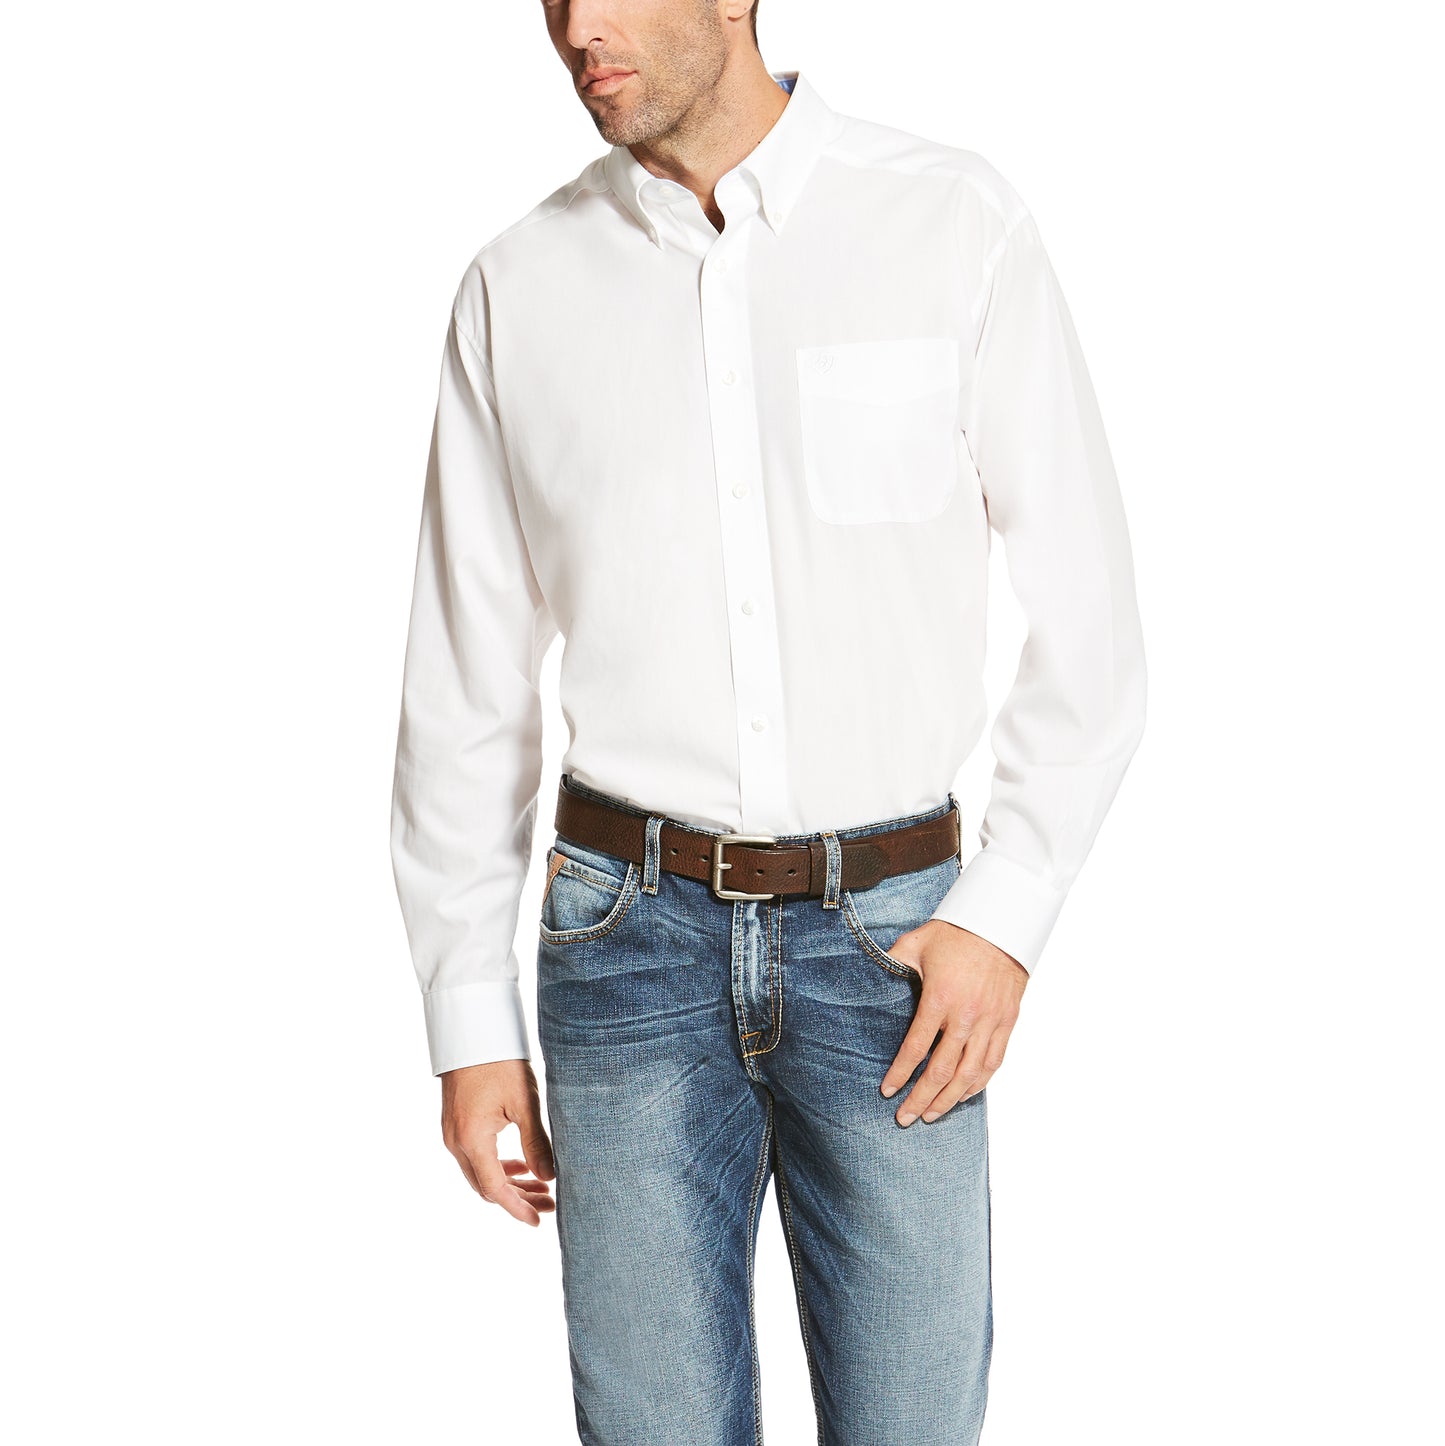 Ariat® Men's Wrinkle Free Solid White Button Down Shirt 10020331